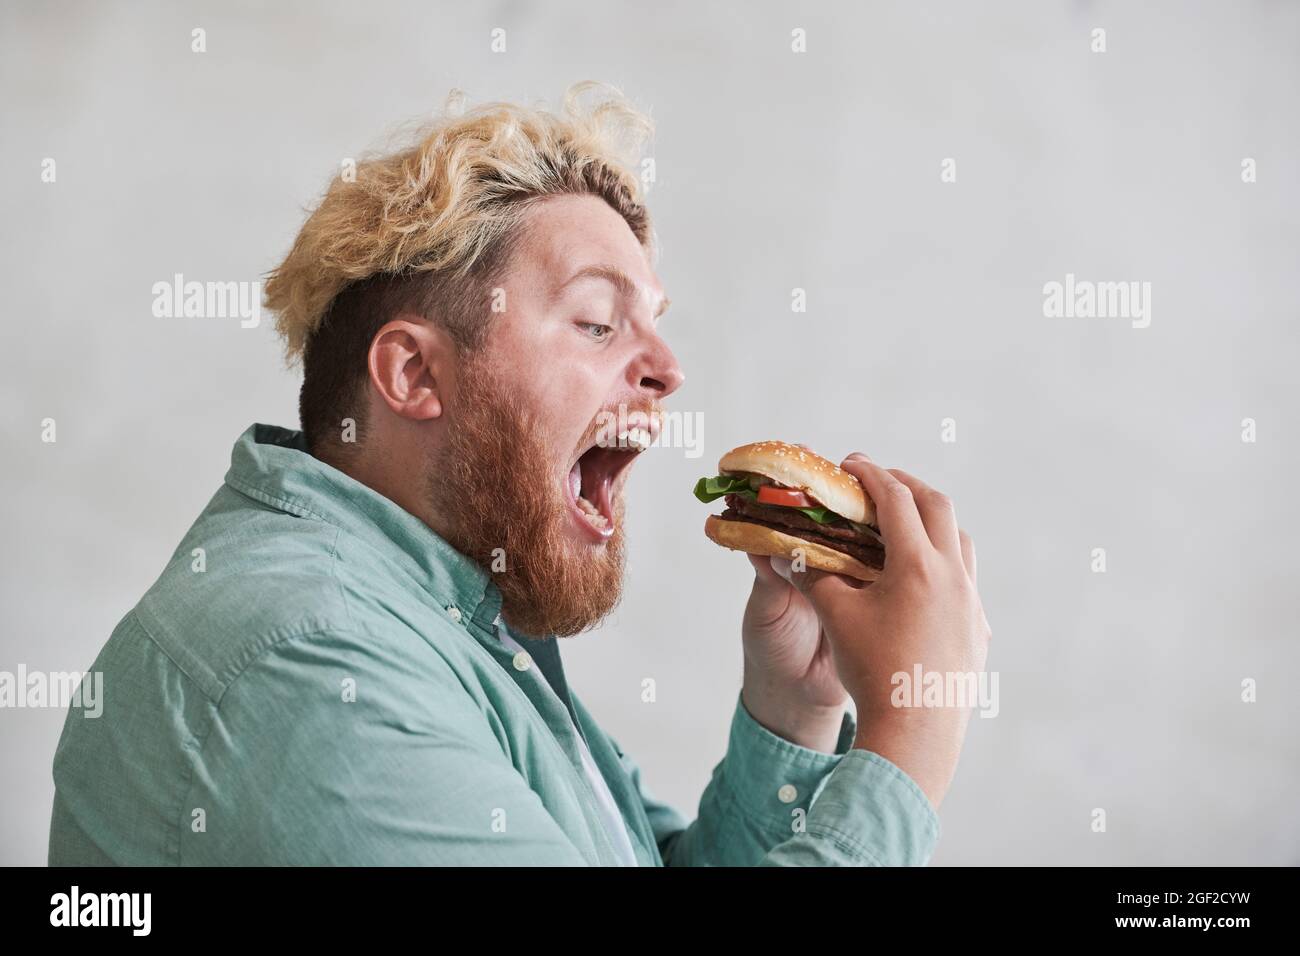 Overweight man opening his mouth and eating fast food against the white background Stock Photo